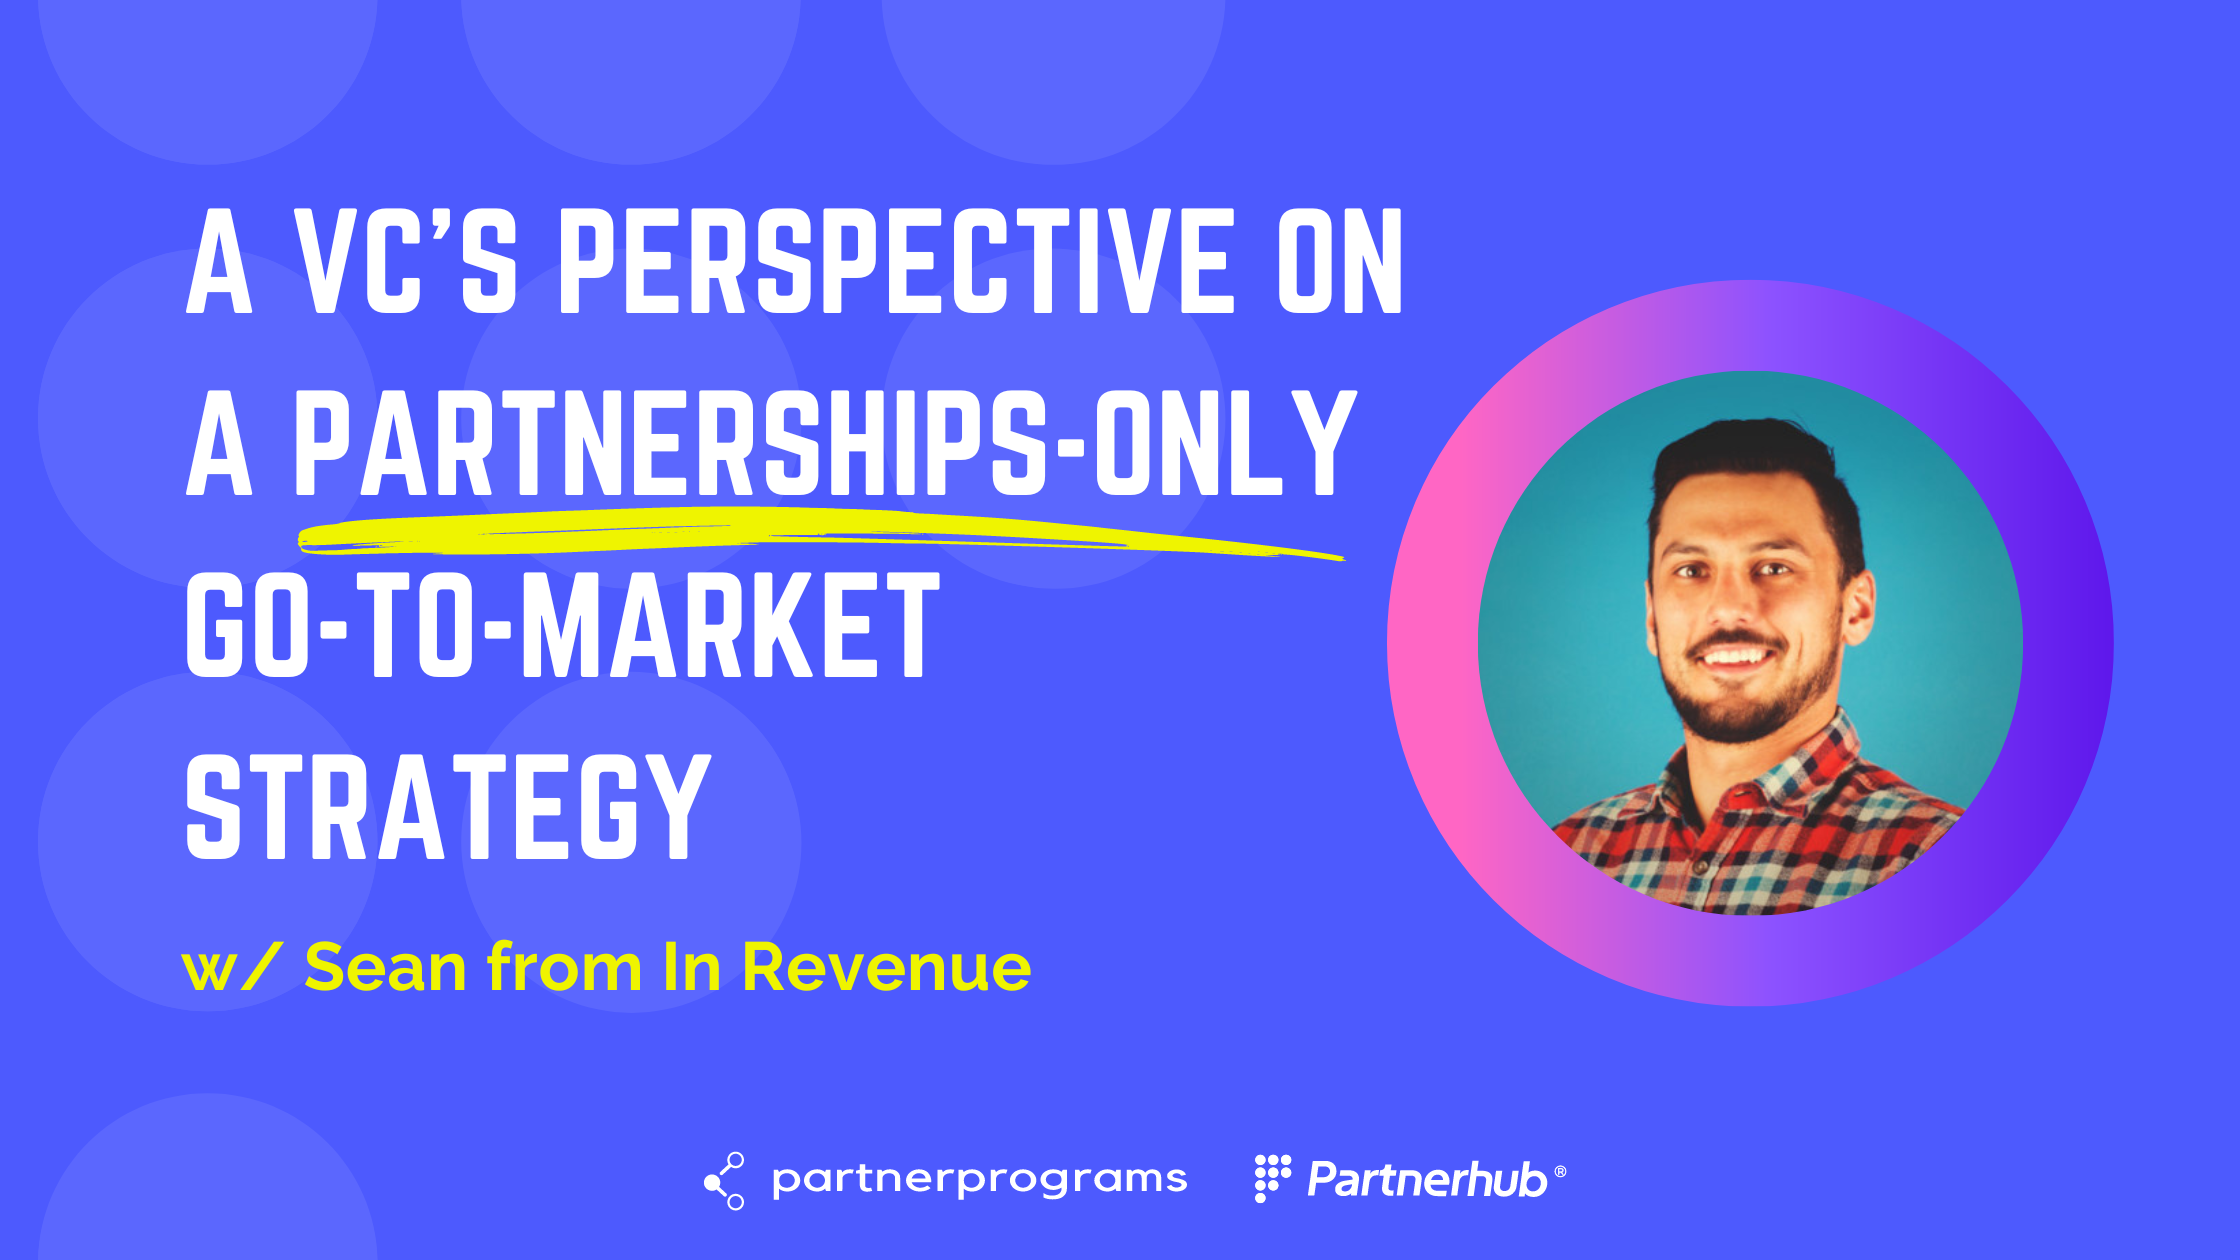 How to execute a partnerships go-to-market for a new tech startup